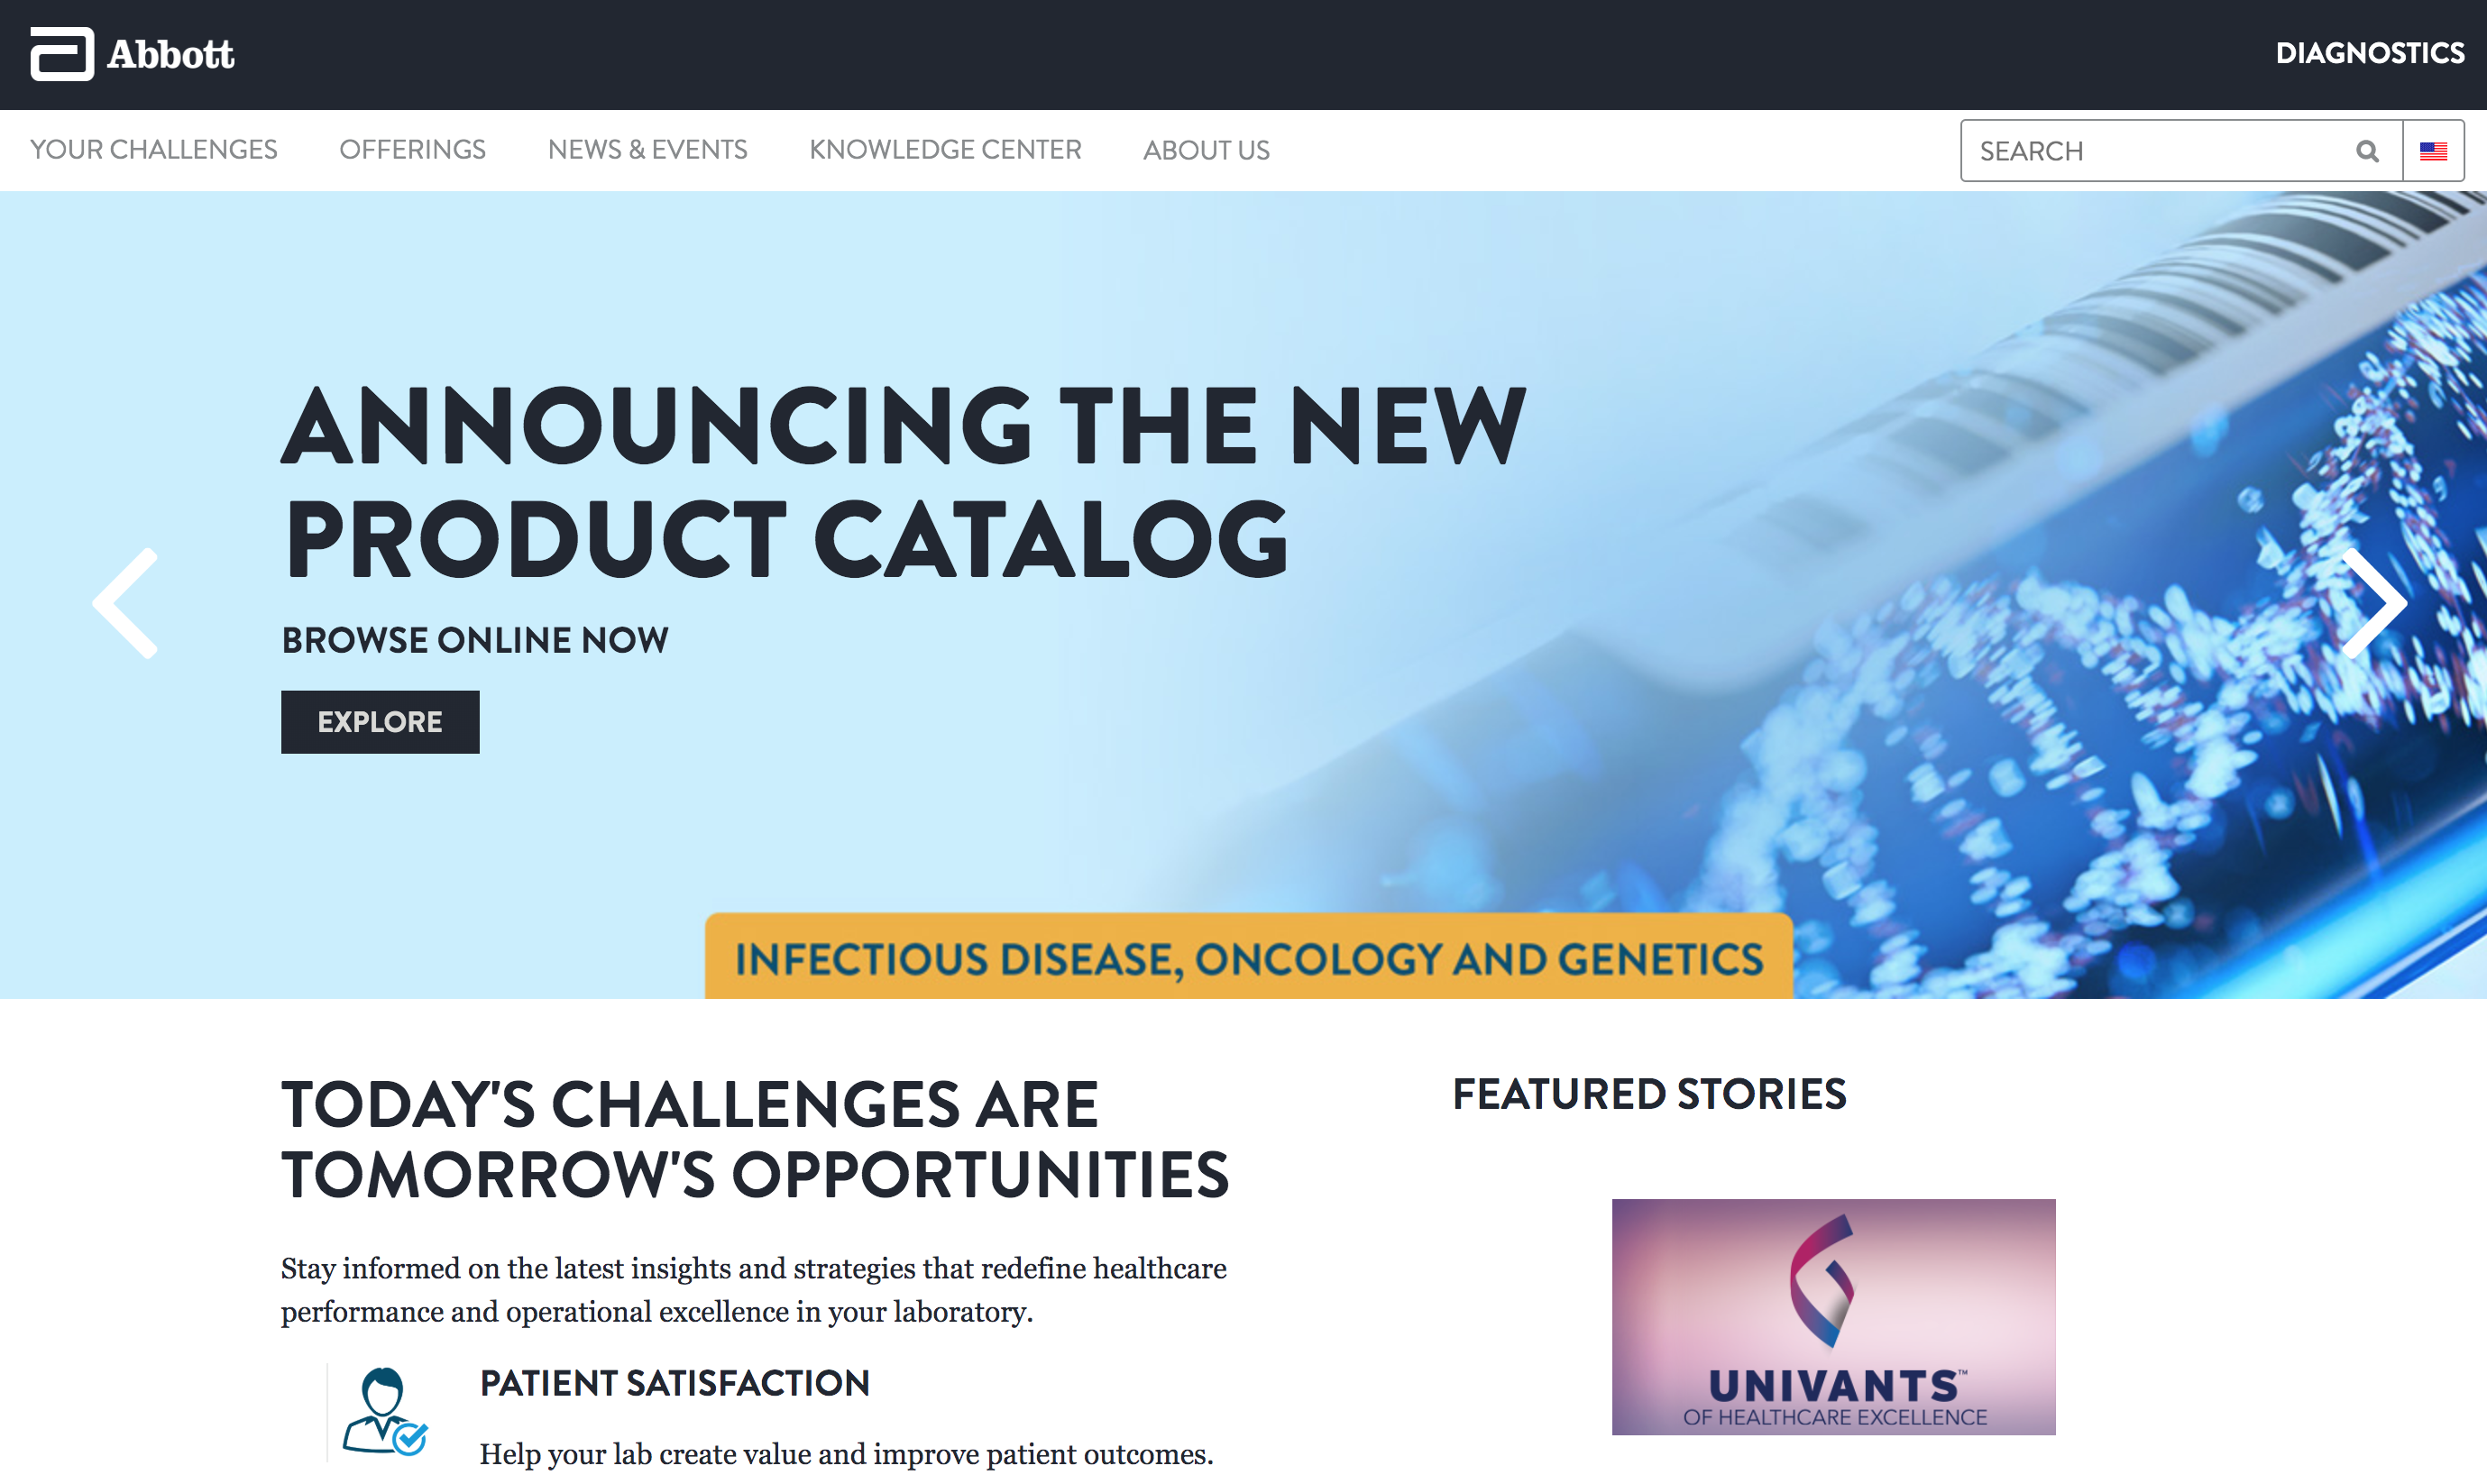 New microsite to showcase Abbott’s diagnostic products and services